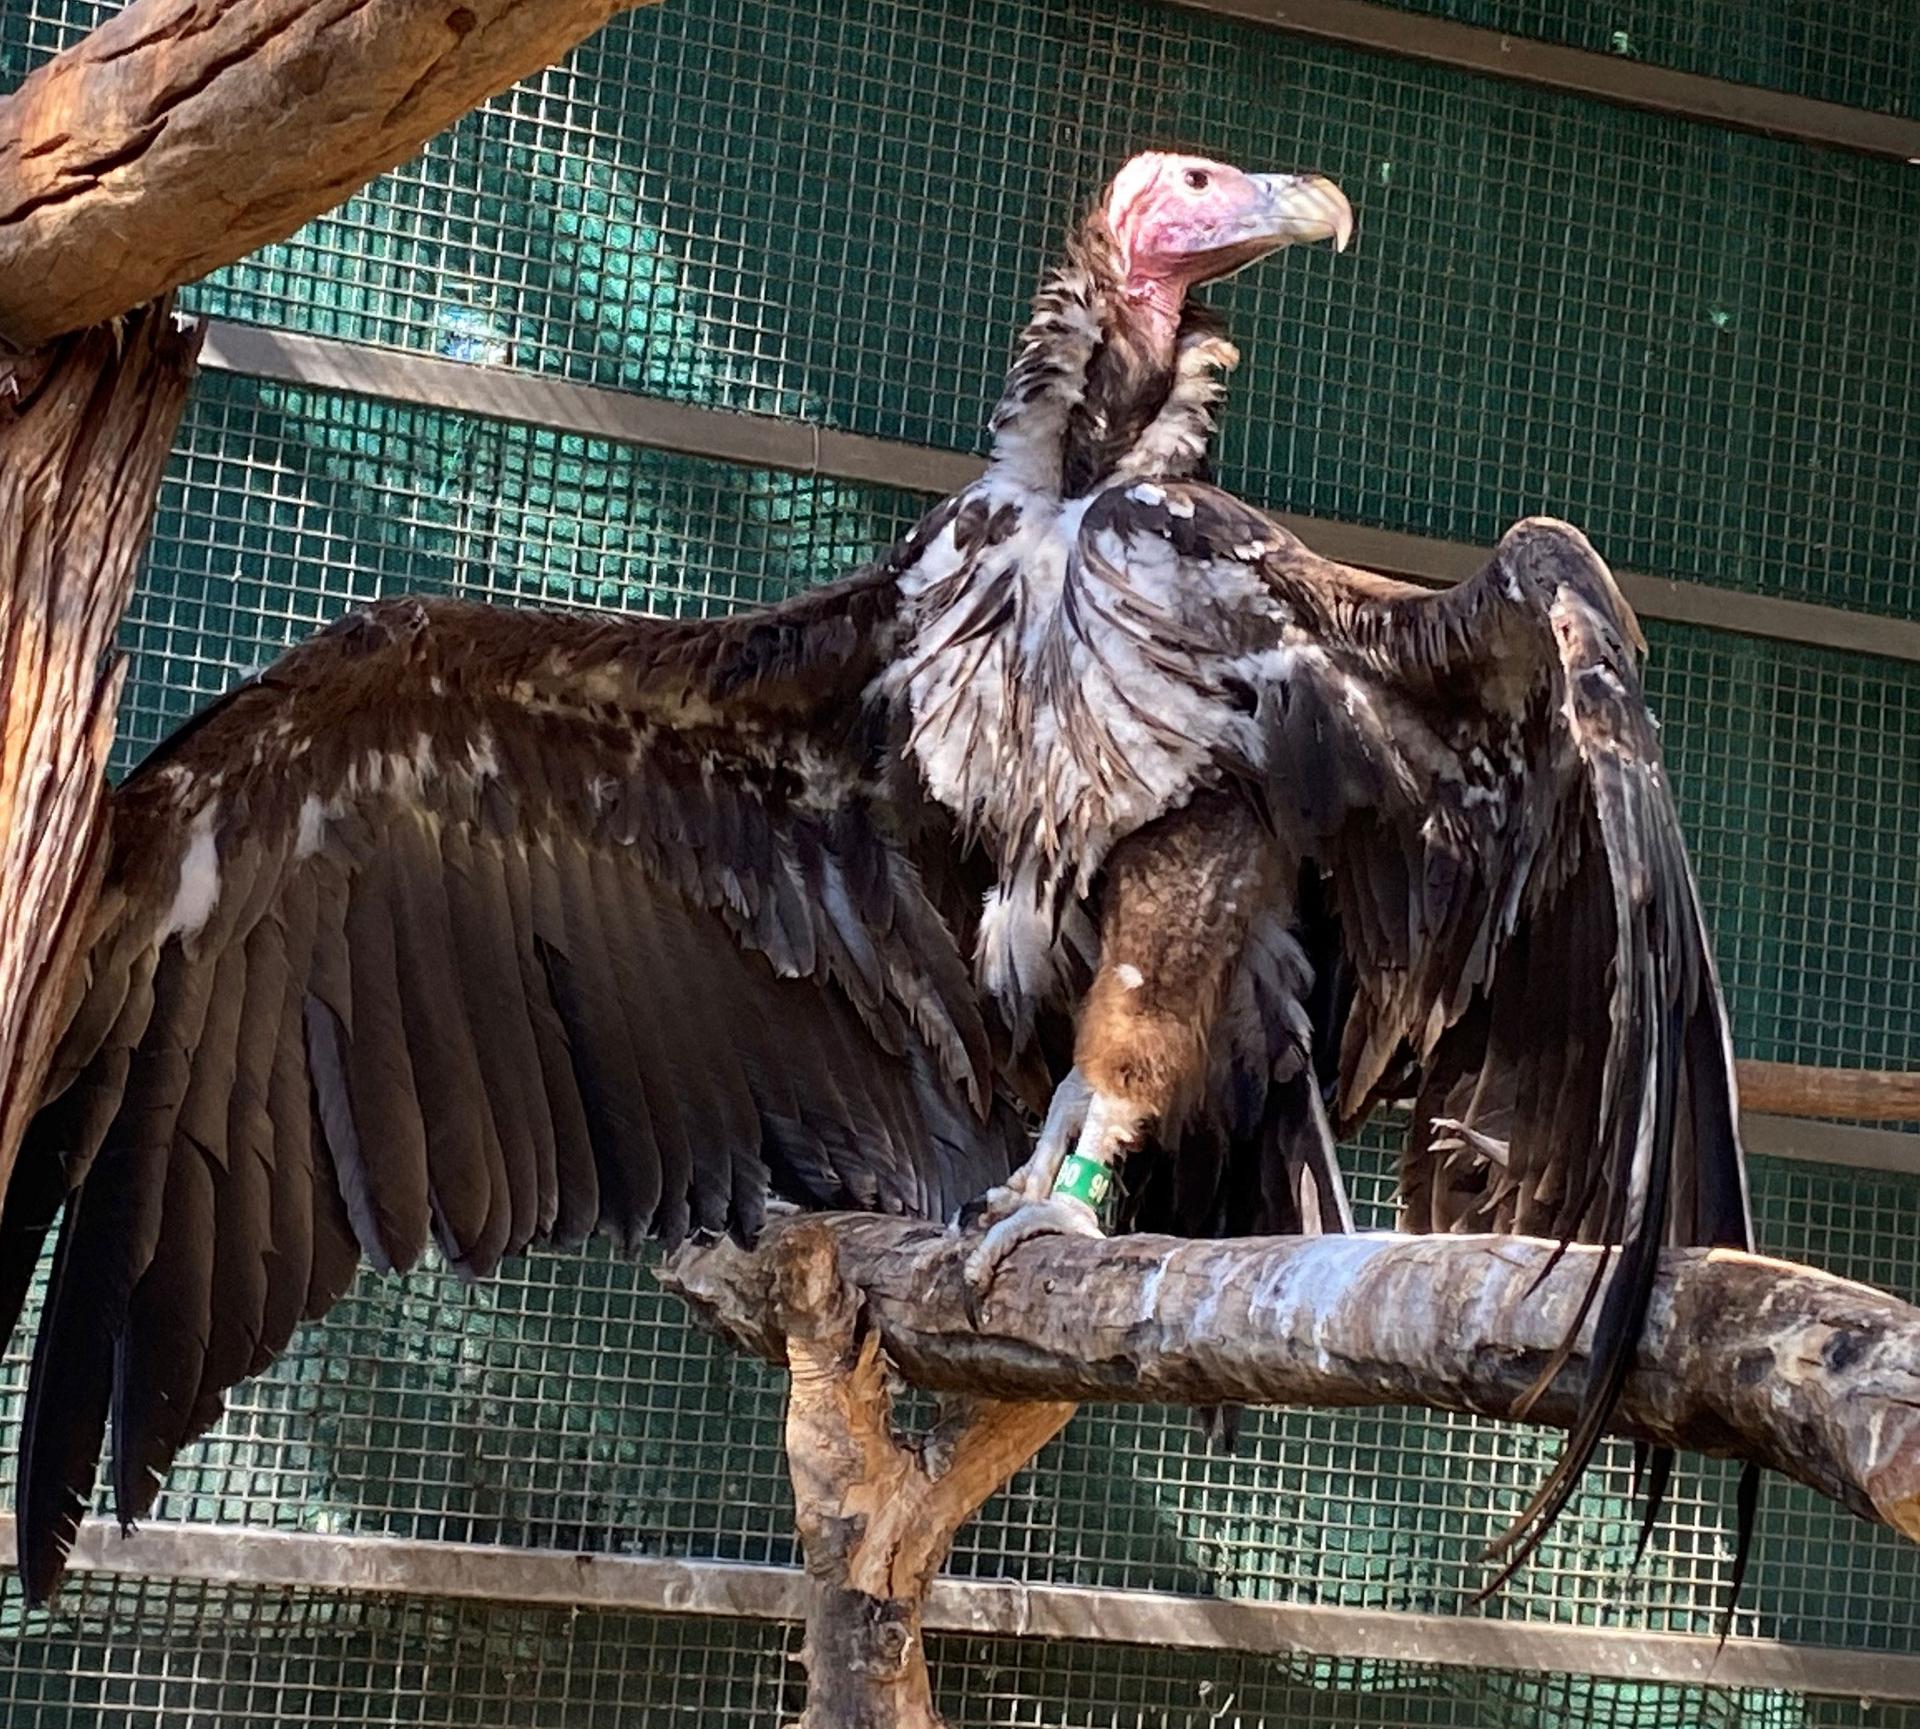 A lappet-faced vulture with a broken wing taken in by Victoria Falls Wildlife Trust is now ready to get released back into the wild.